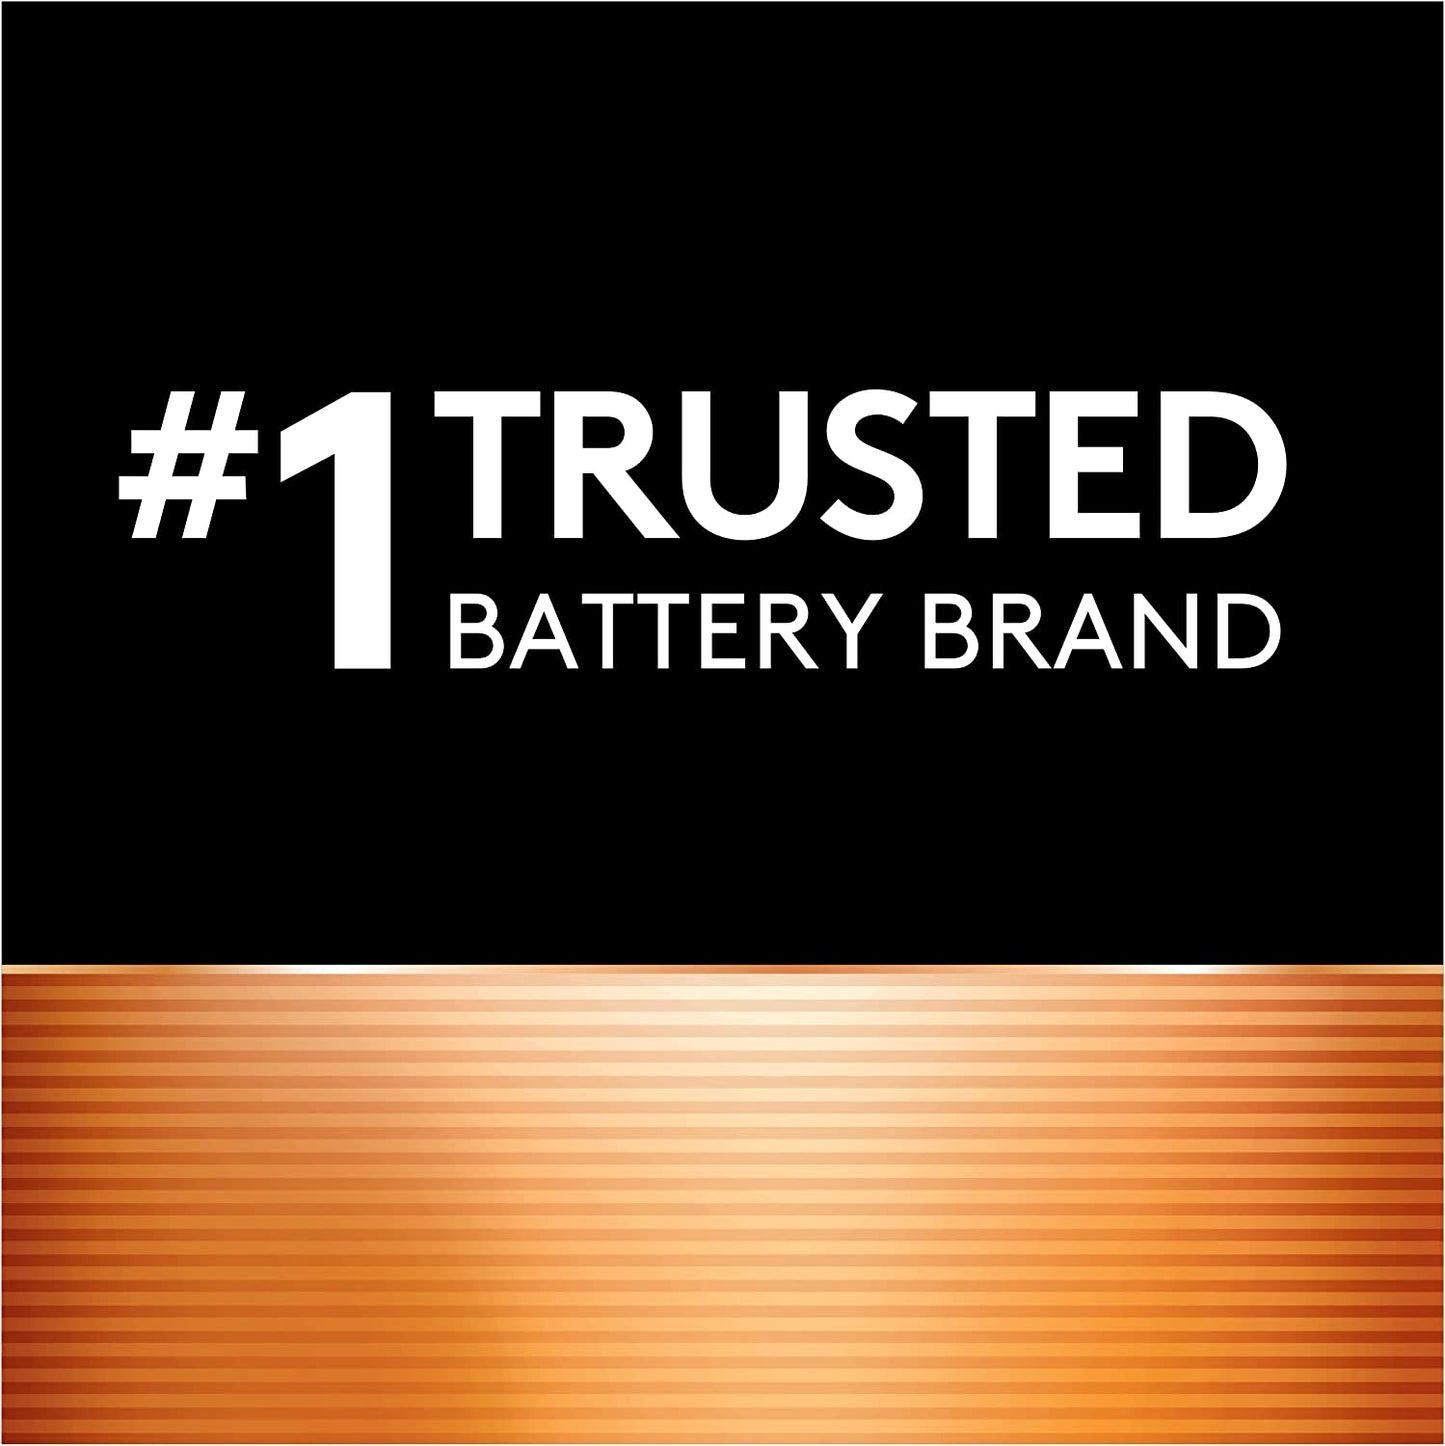 2PC DURACELL Ultra CR123A Lithium DL123A CR17345 3V Lithium Battery, for Security System/Camera & more, Made in USA